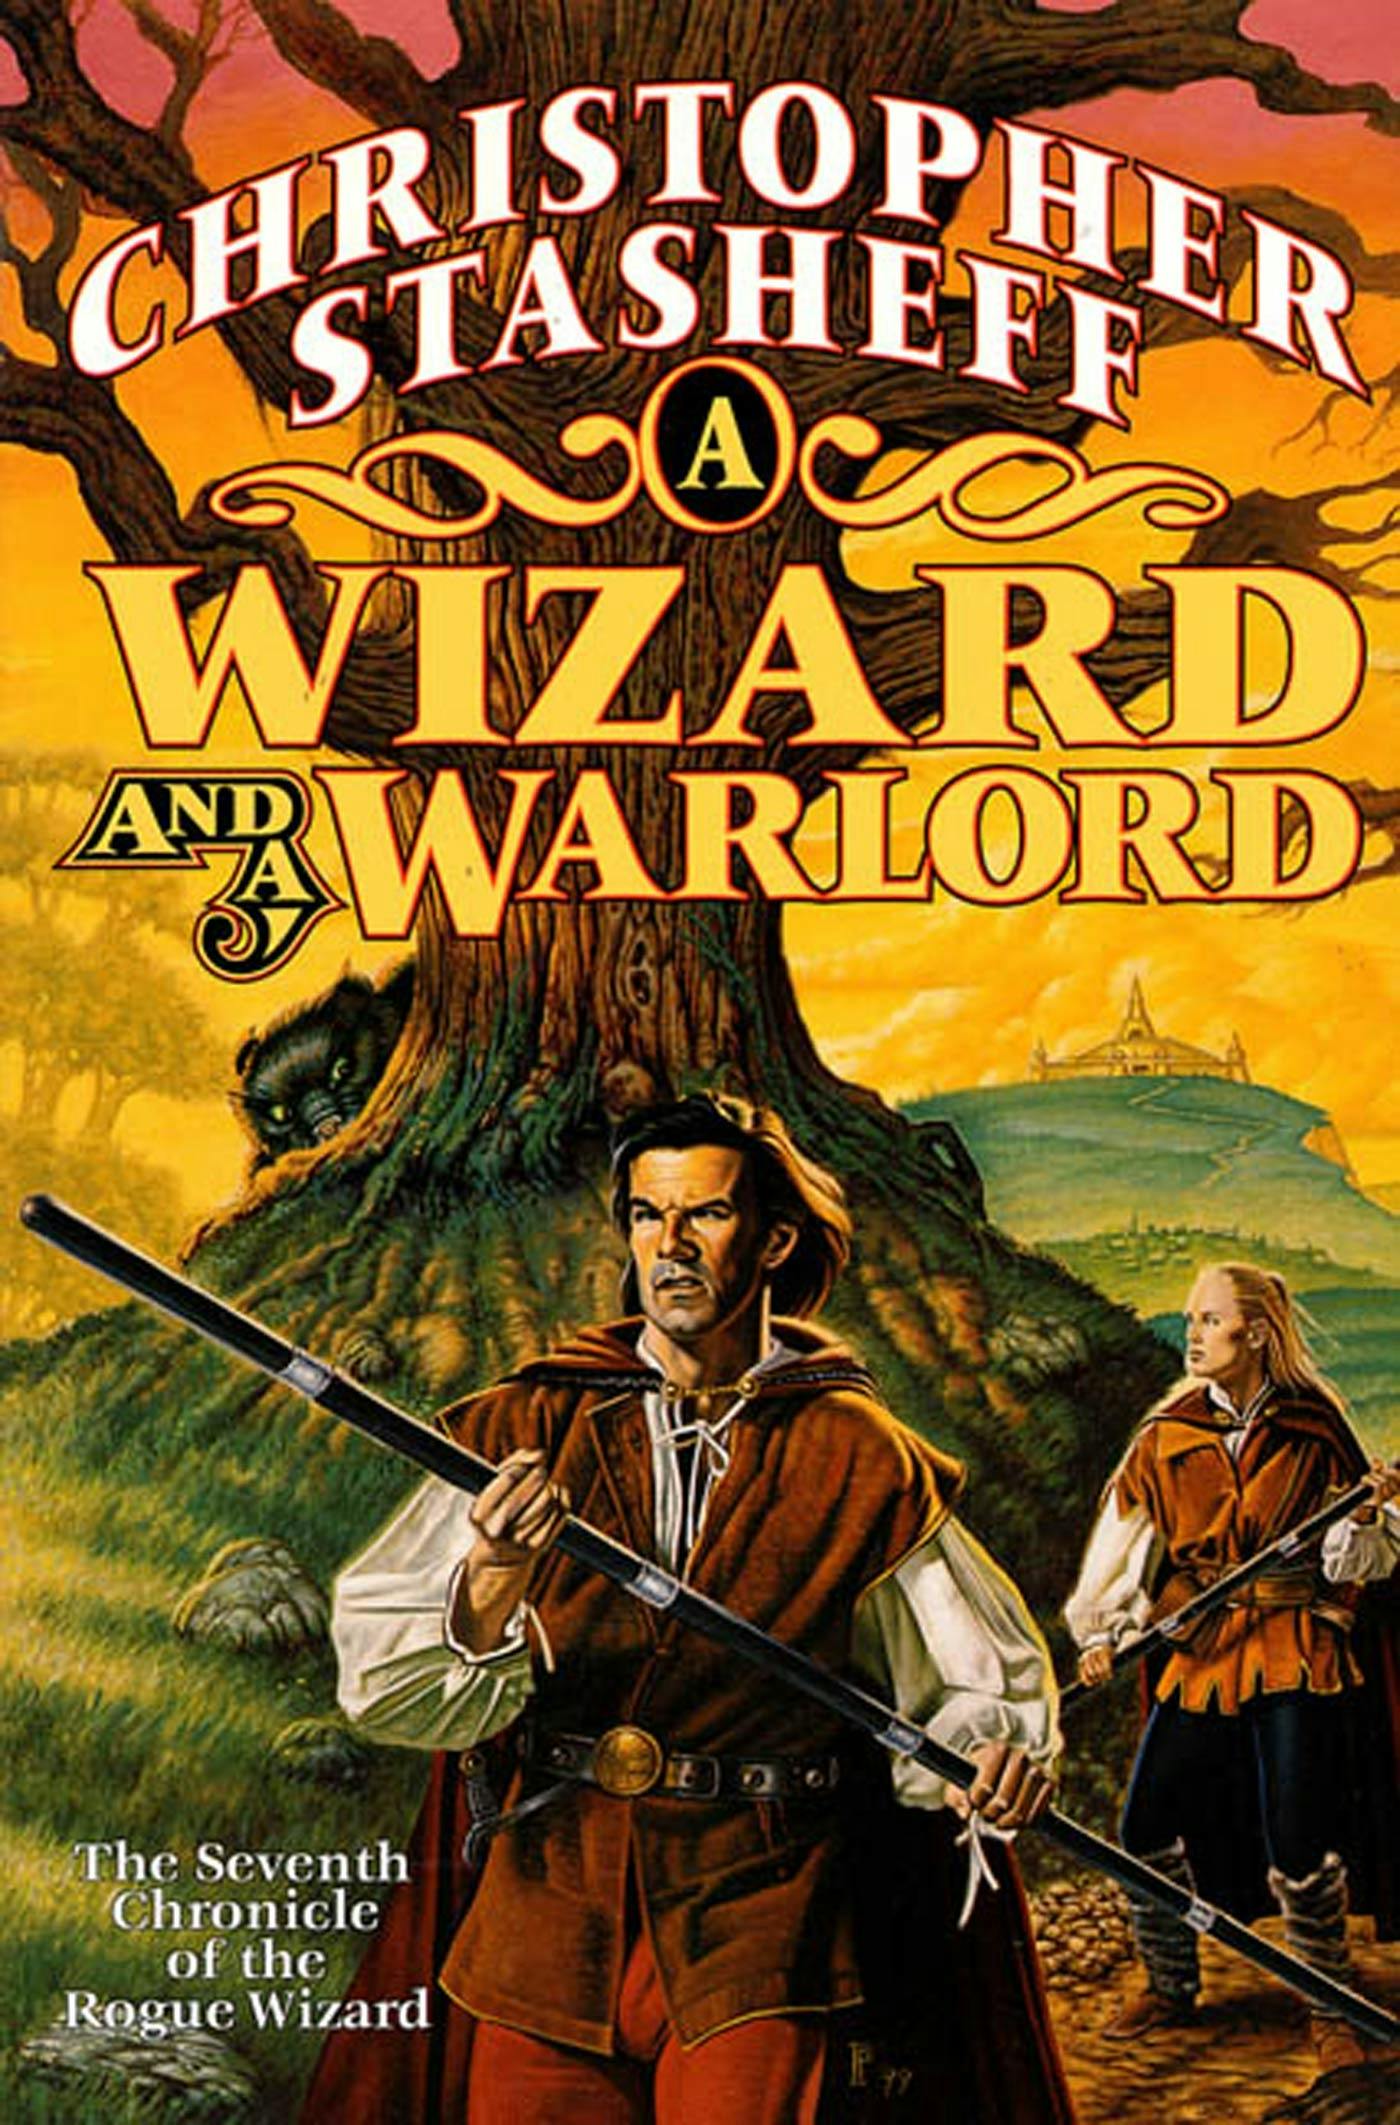 Cover for the book titled as: A Wizard and a Warlord